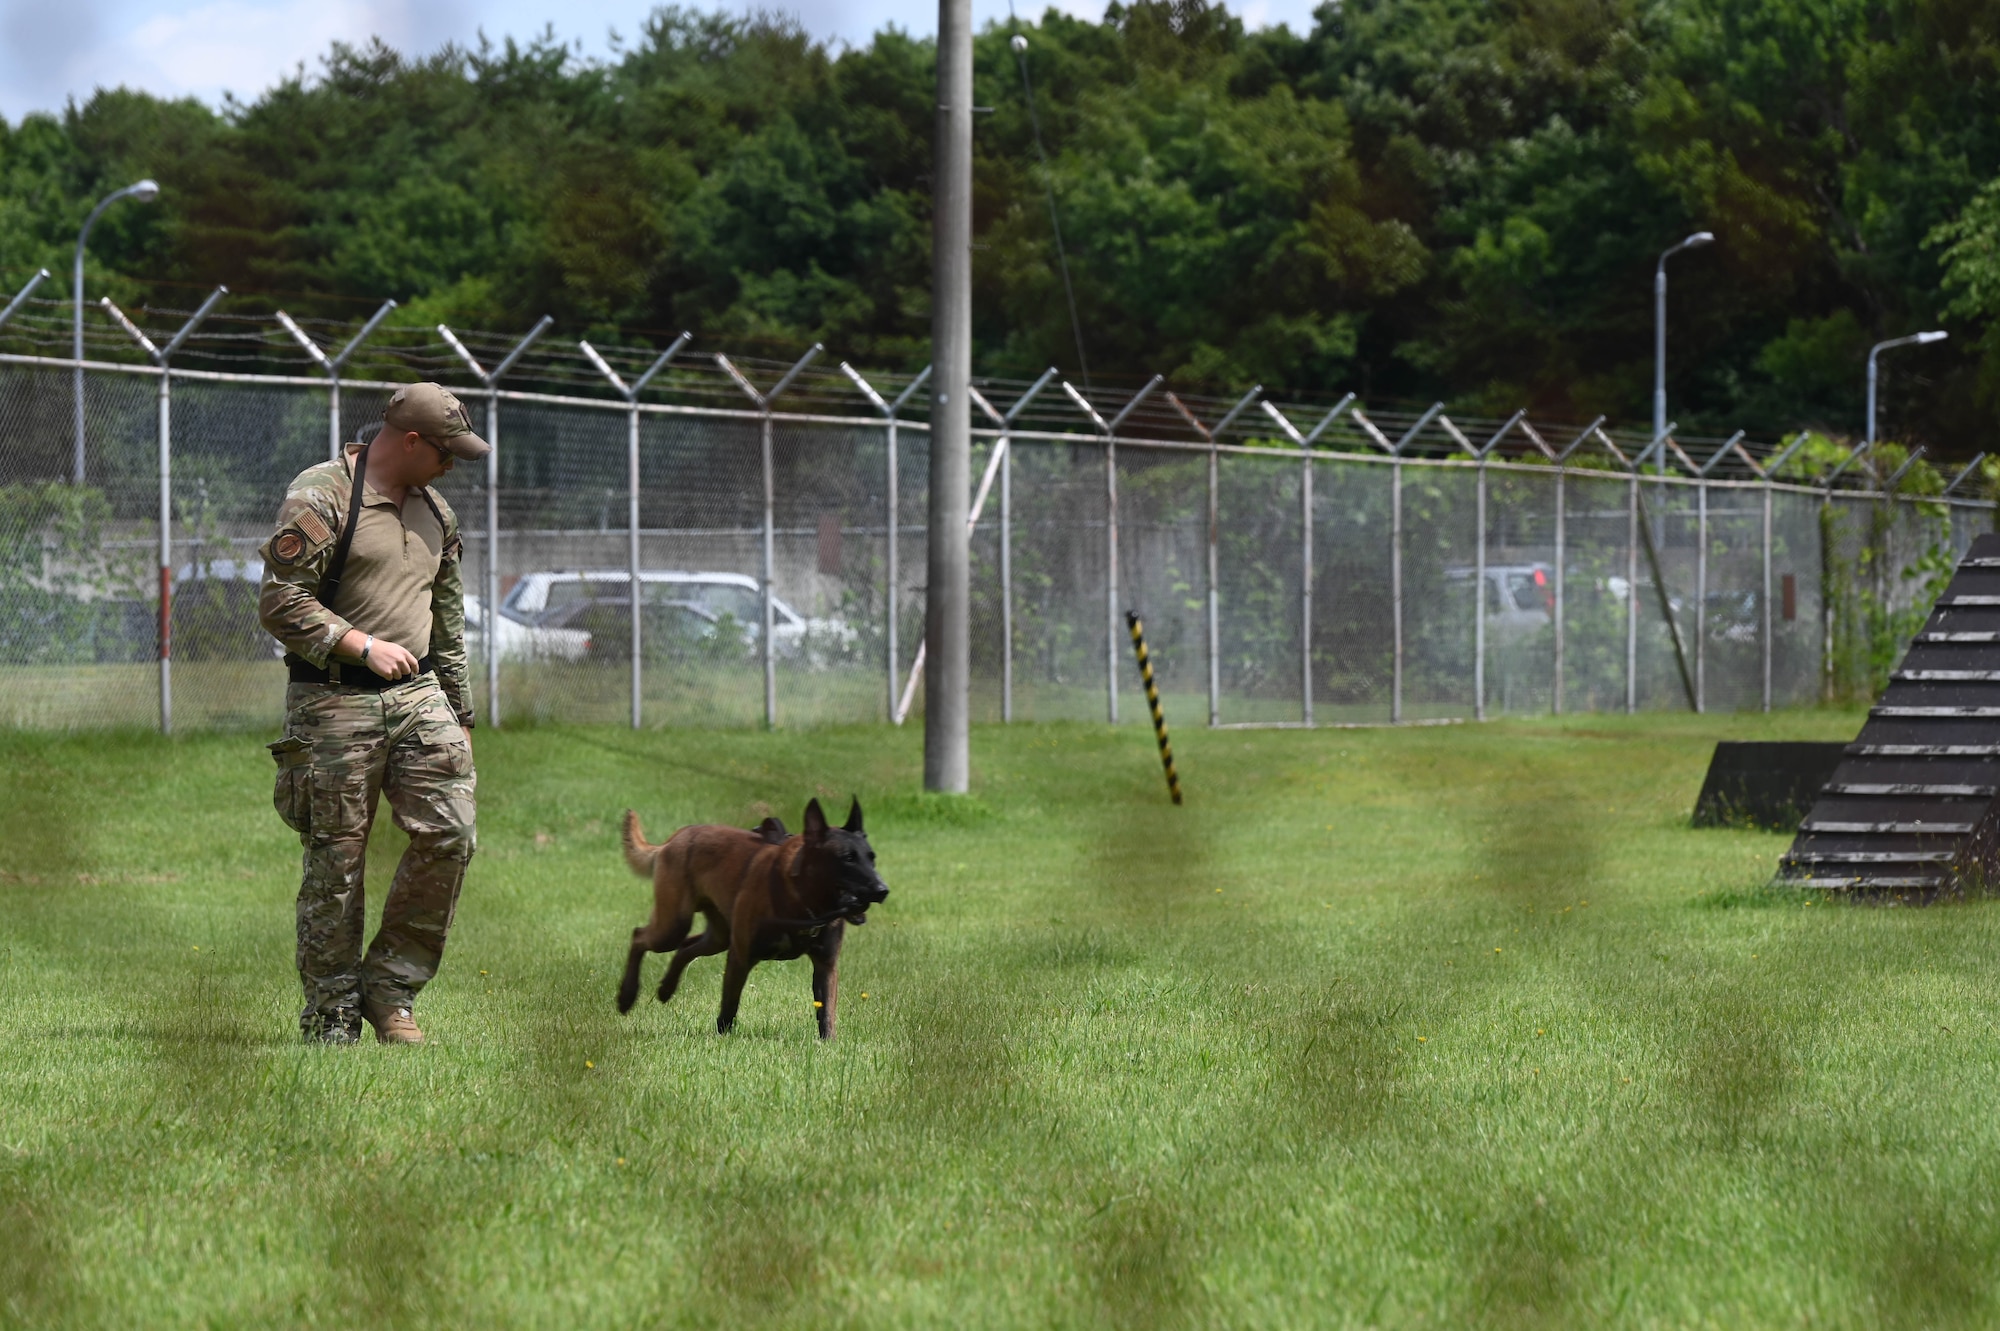 U.S. Air Force Staff Sgt. Tyler Parker, 35th Security Forces military working dog (MWD) handler, demonstrates the MWD’s abilities and training for a Misawa Friendship Tour at Misawa Air Base, Japan, July 14, 2023.